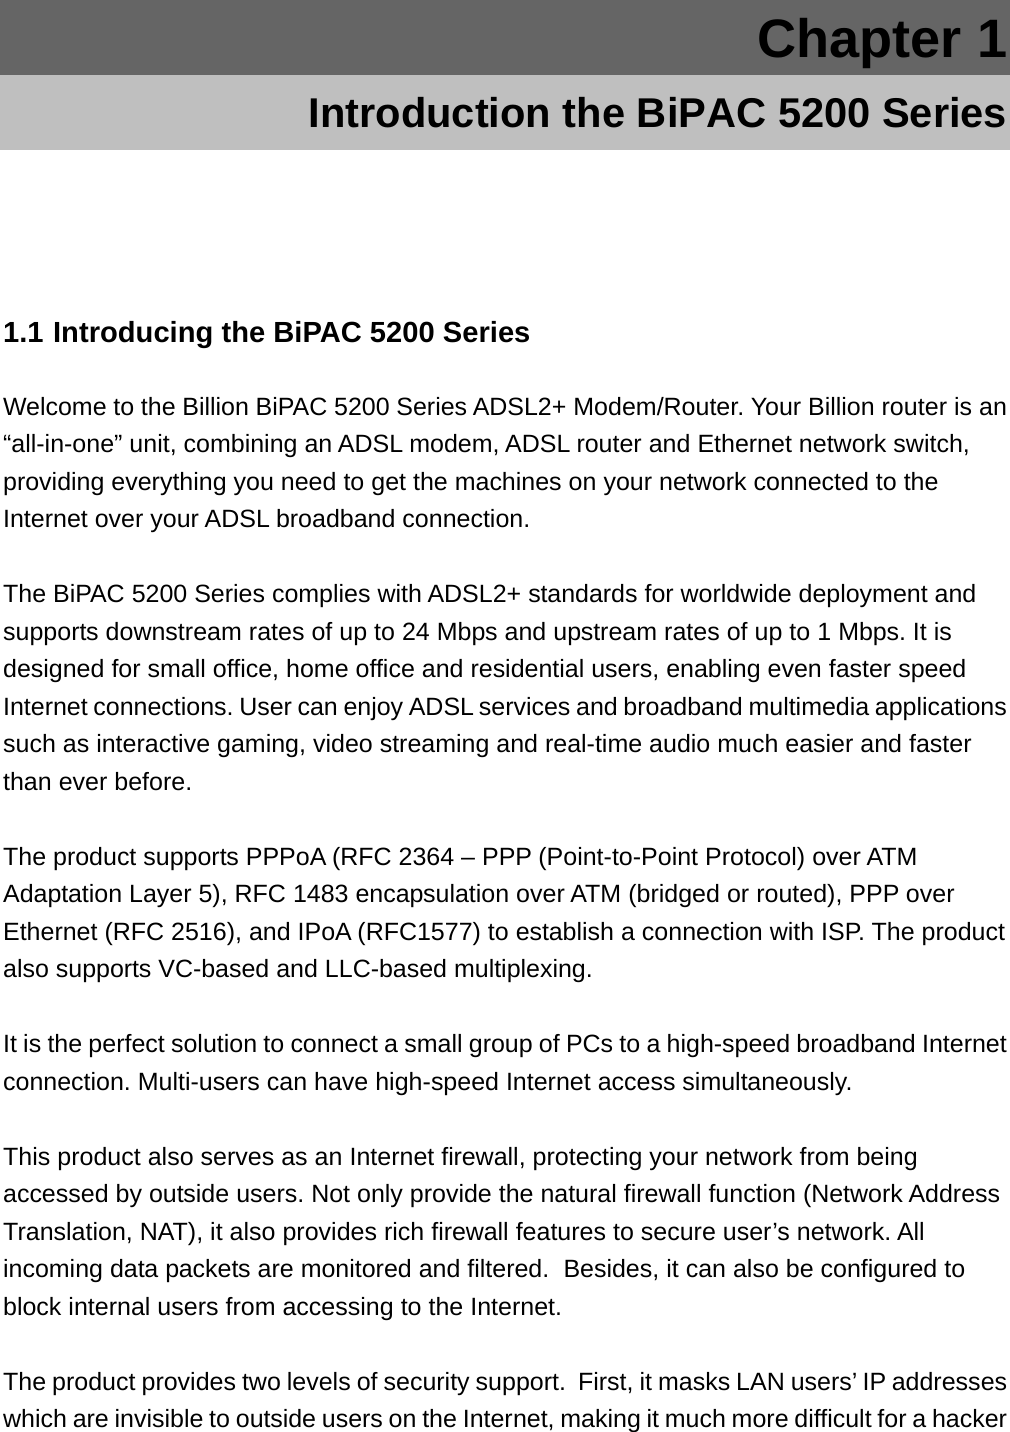 Chapter 1 Introduction the BiPAC 5200 Series 1.1 Introducing the BiPAC 5200 Series Welcome to the Billion BiPAC 5200 Series ADSL2+ Modem/Router. Your Billion router is an “all-in-one” unit, combining an ADSL modem, ADSL router and Ethernet network switch, providing everything you need to get the machines on your network connected to the Internet over your ADSL broadband connection.  The BiPAC 5200 Series complies with ADSL2+ standards for worldwide deployment and supports downstream rates of up to 24 Mbps and upstream rates of up to 1 Mbps. It is designed for small office, home office and residential users, enabling even faster speed Internet connections. User can enjoy ADSL services and broadband multimedia applications such as interactive gaming, video streaming and real-time audio much easier and faster than ever before.  The product supports PPPoA (RFC 2364 – PPP (Point-to-Point Protocol) over ATM Adaptation Layer 5), RFC 1483 encapsulation over ATM (bridged or routed), PPP over Ethernet (RFC 2516), and IPoA (RFC1577) to establish a connection with ISP. The product also supports VC-based and LLC-based multiplexing.  It is the perfect solution to connect a small group of PCs to a high-speed broadband Internet connection. Multi-users can have high-speed Internet access simultaneously.   This product also serves as an Internet firewall, protecting your network from being accessed by outside users. Not only provide the natural firewall function (Network Address Translation, NAT), it also provides rich firewall features to secure user’s network. All incoming data packets are monitored and filtered.  Besides, it can also be configured to block internal users from accessing to the Internet.  The product provides two levels of security support.  First, it masks LAN users’ IP addresses which are invisible to outside users on the Internet, making it much more difficult for a hacker 